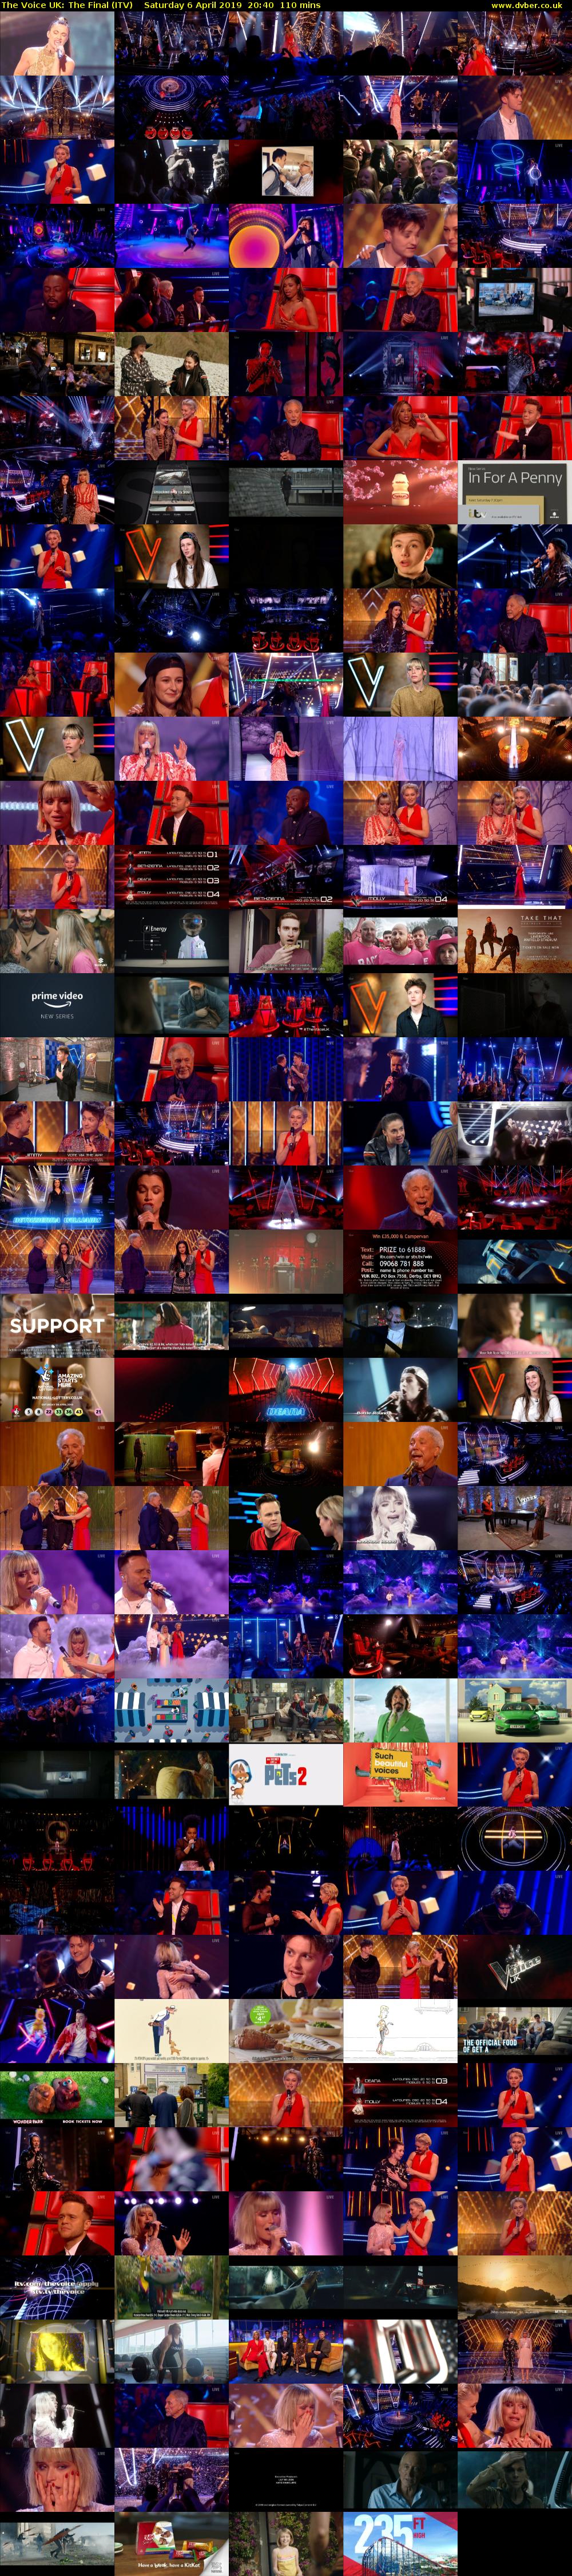 The Voice UK: The Final (ITV) Saturday 6 April 2019 20:40 - 22:30